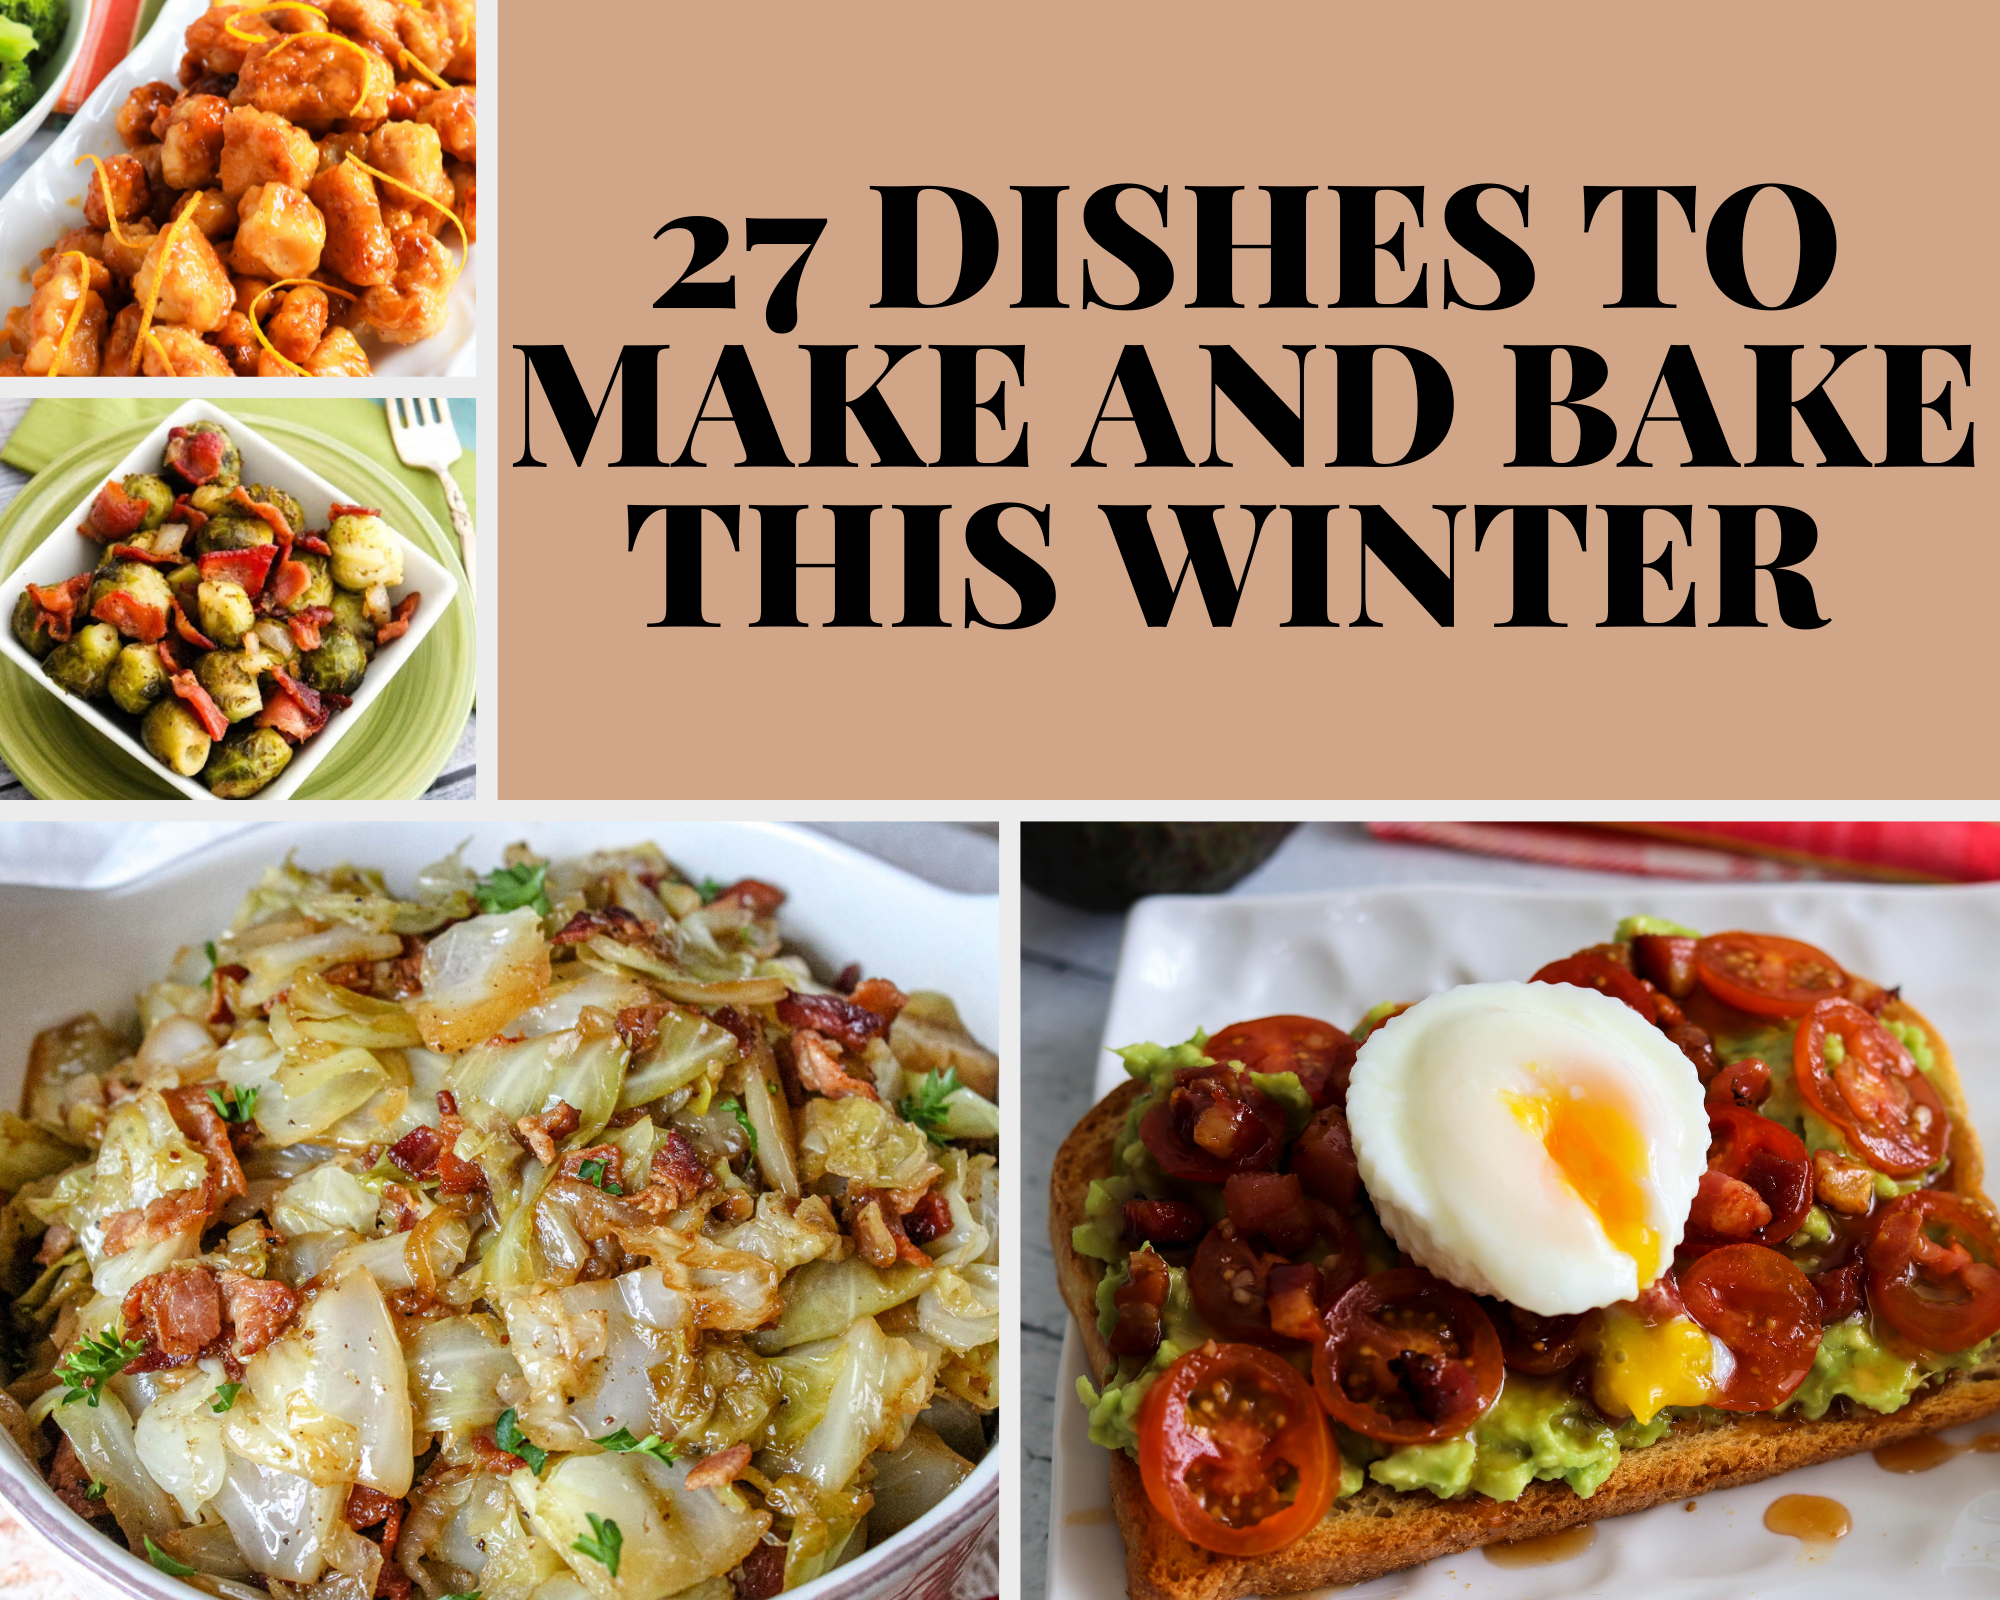 recipes to make and bake this winter